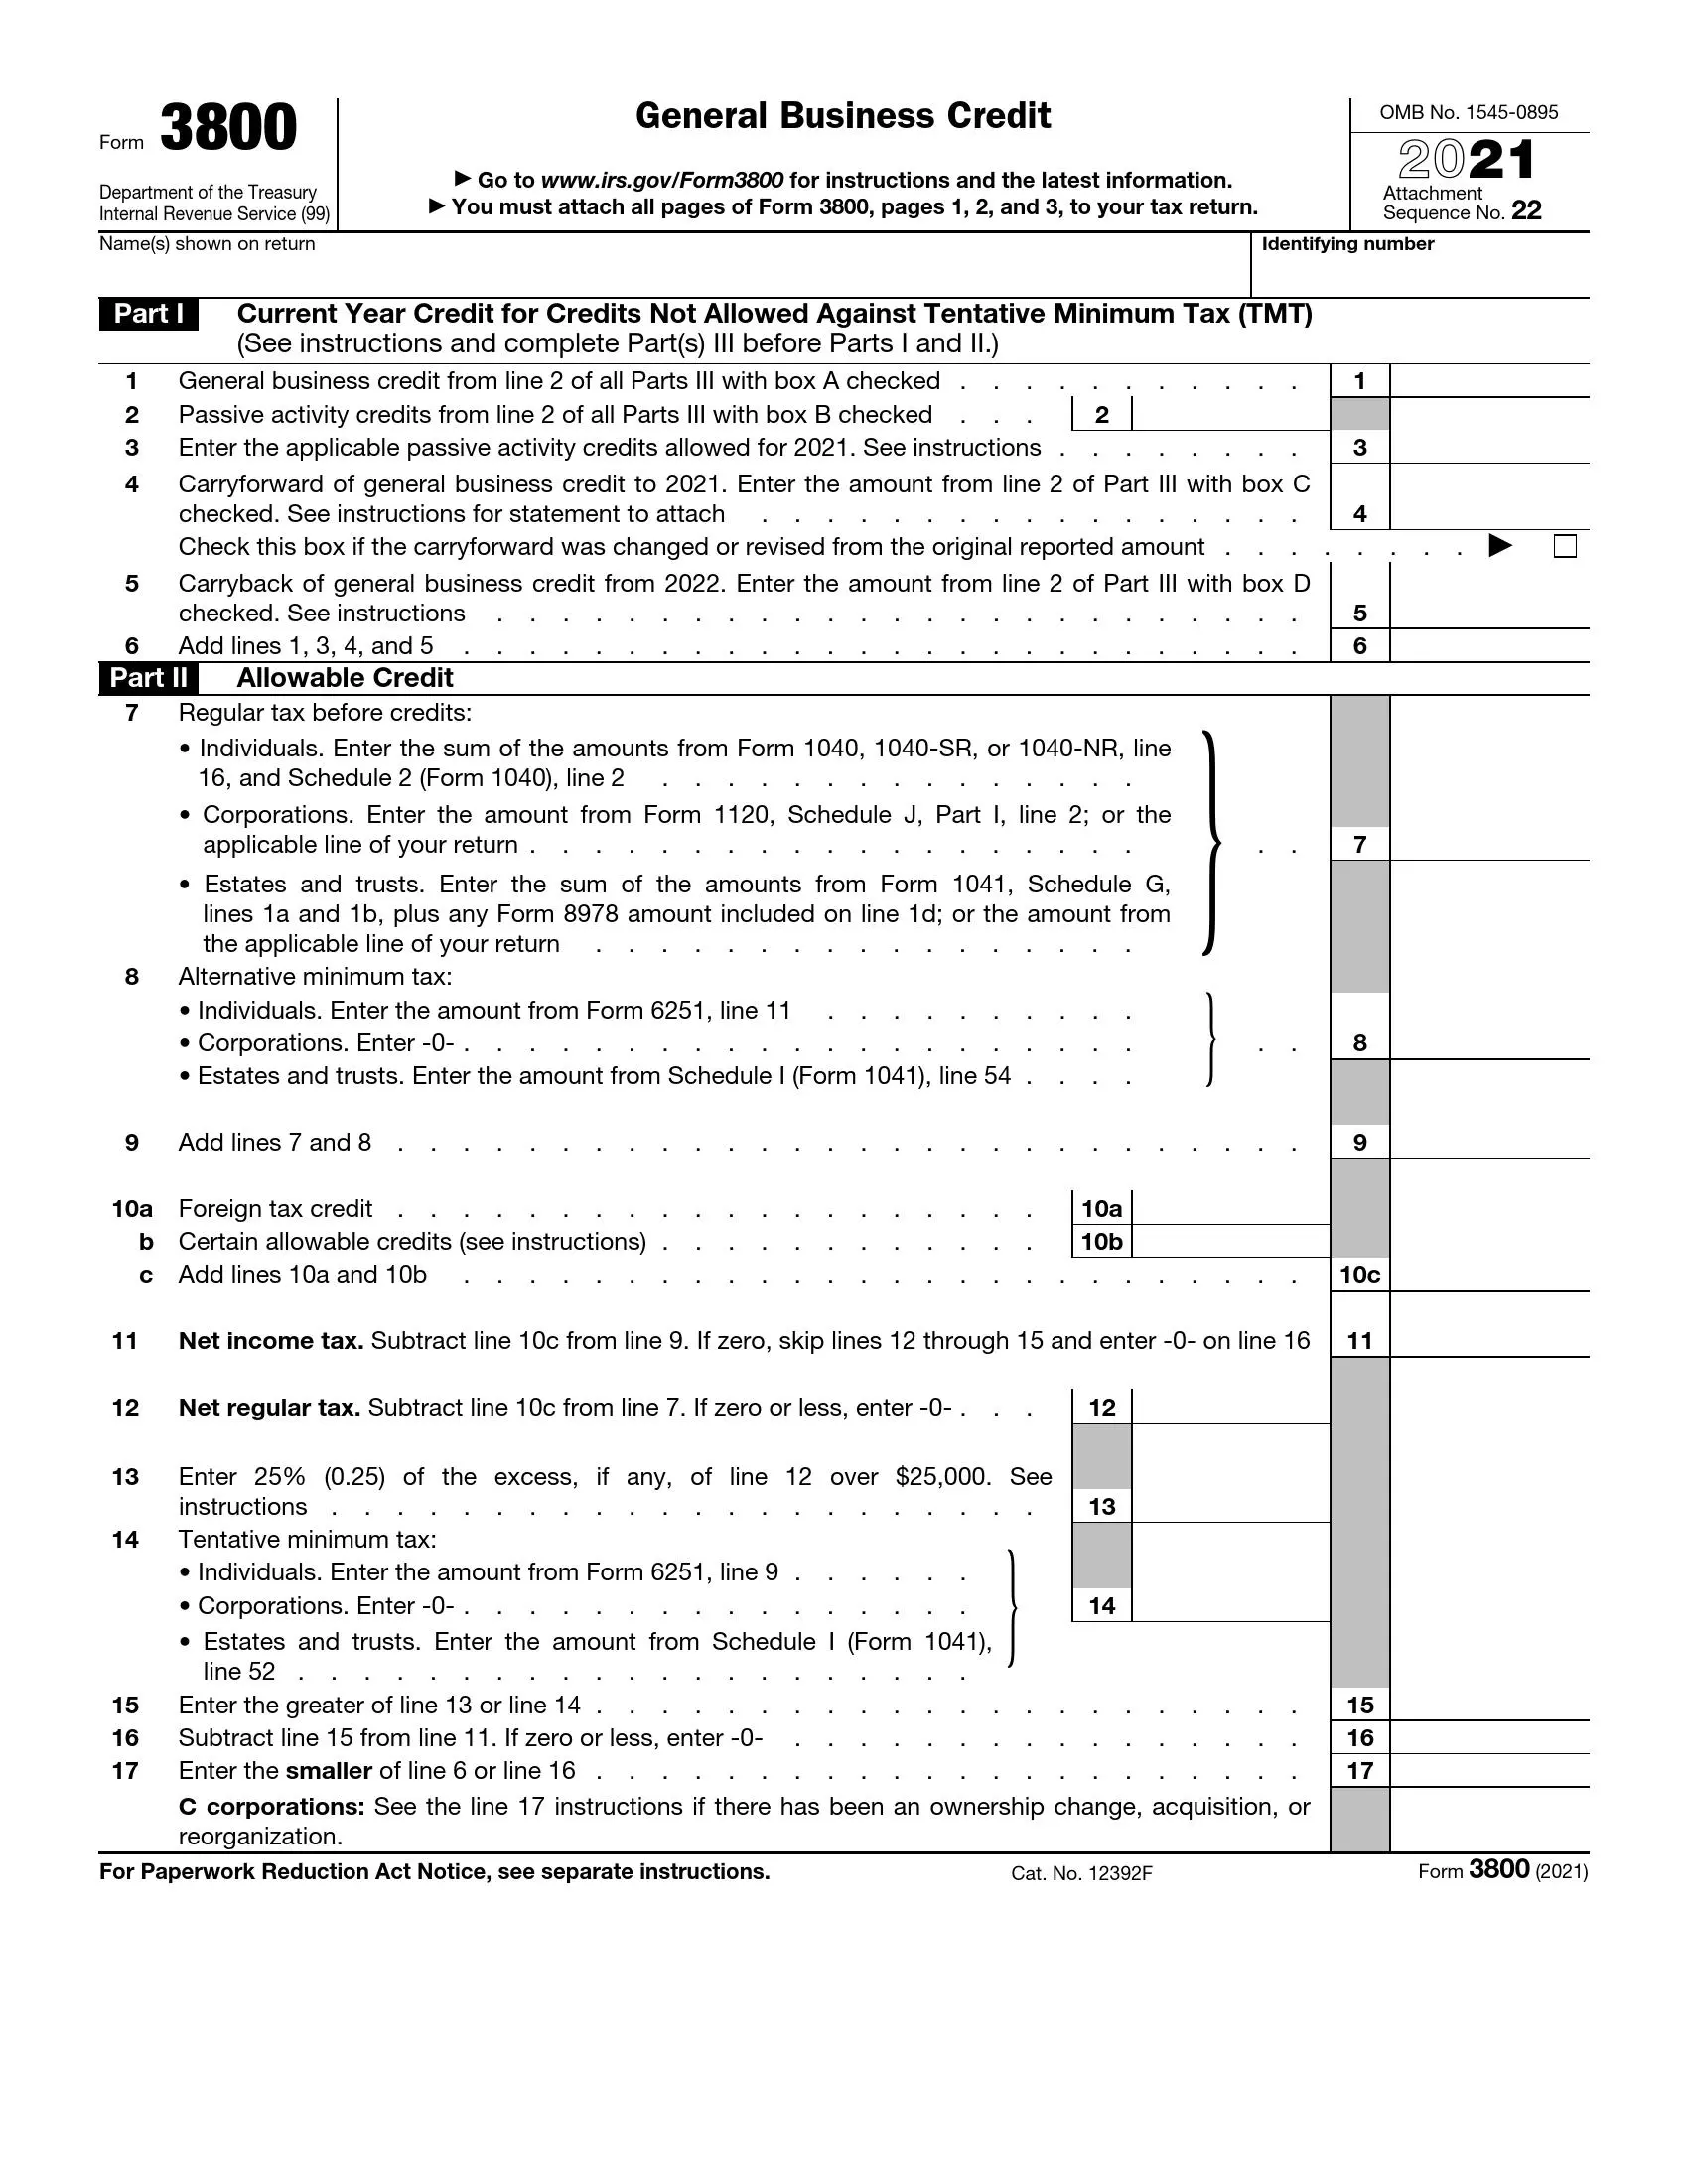 irs form 3800 2021 preview